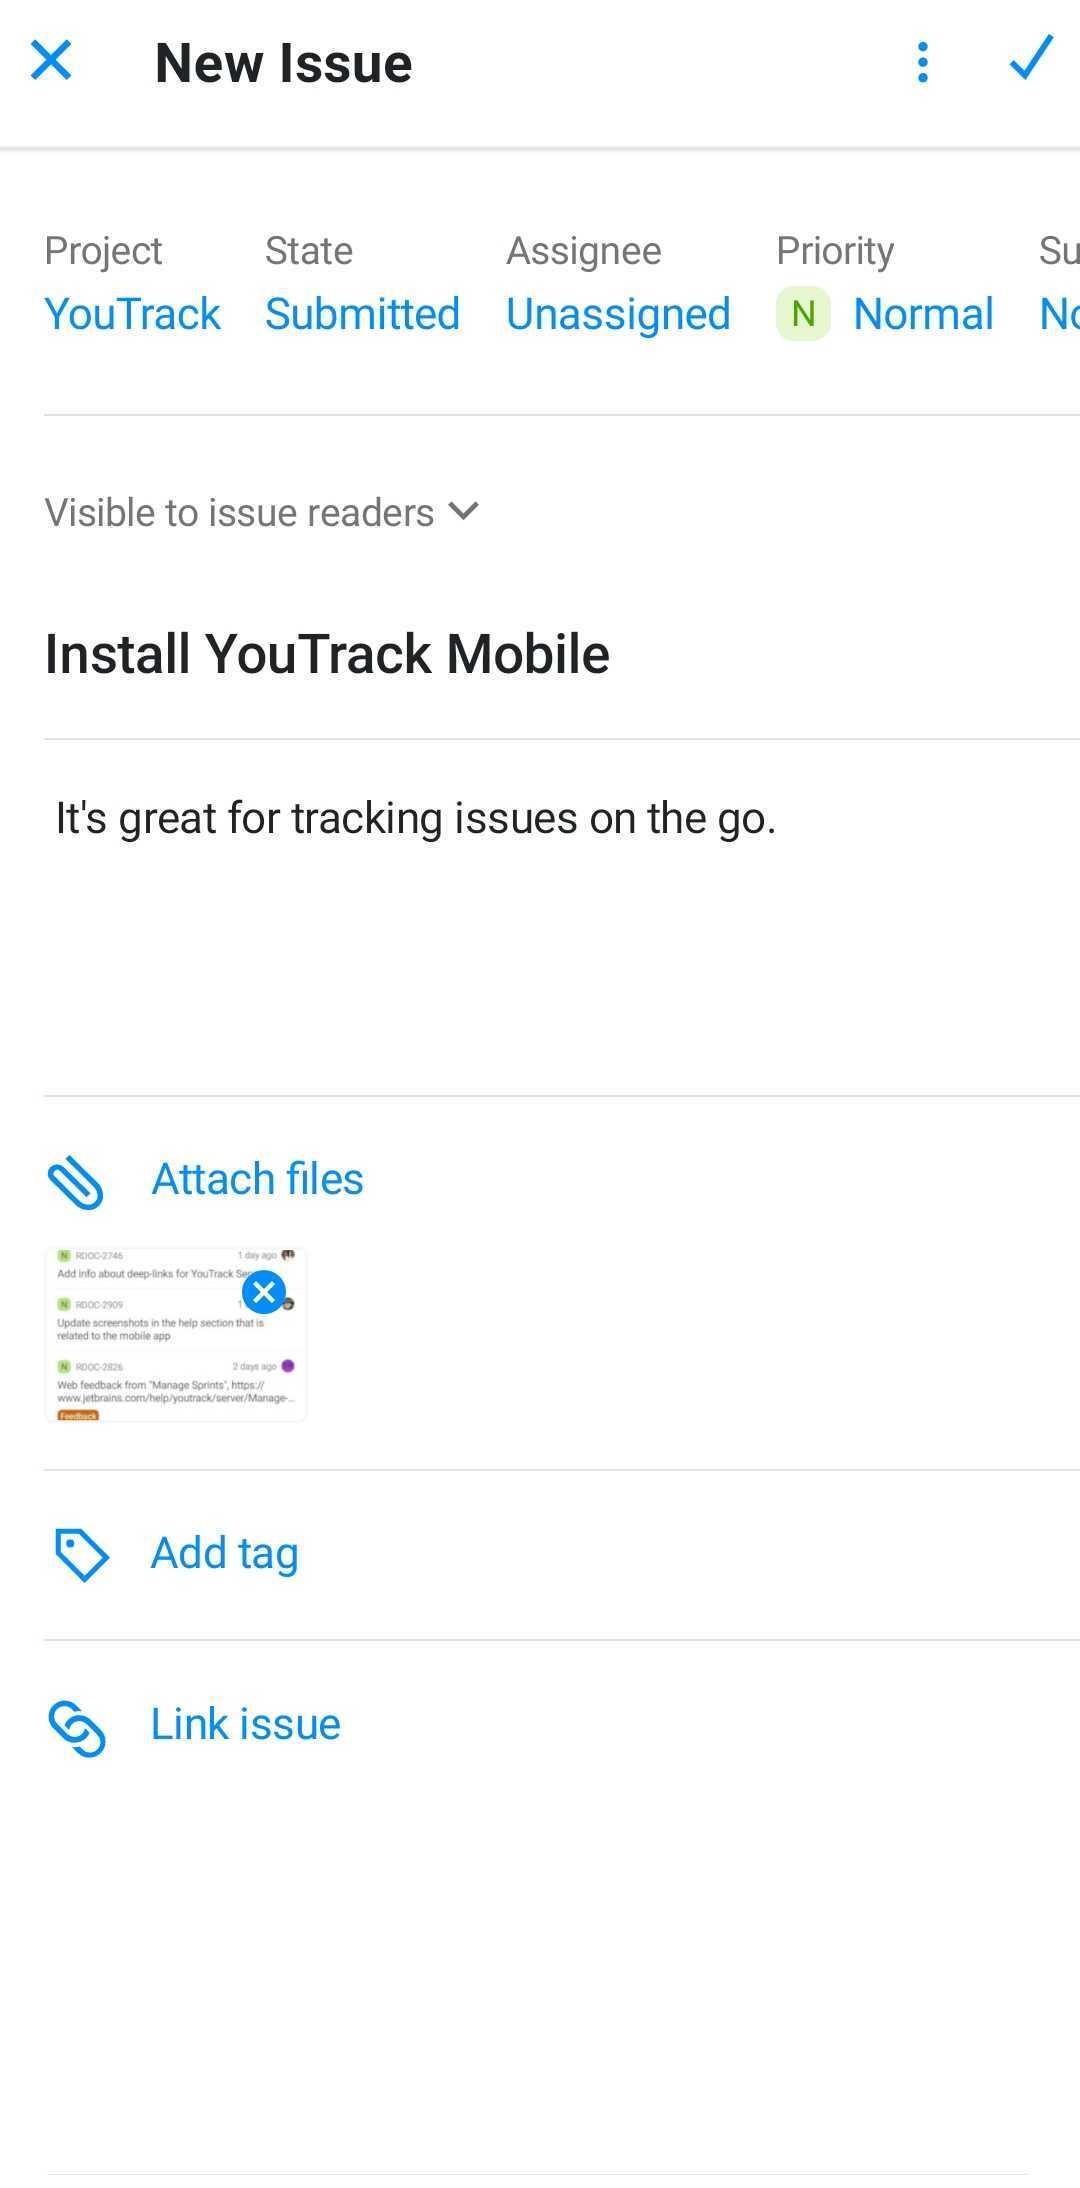 New issue in YouTrack Mobile.